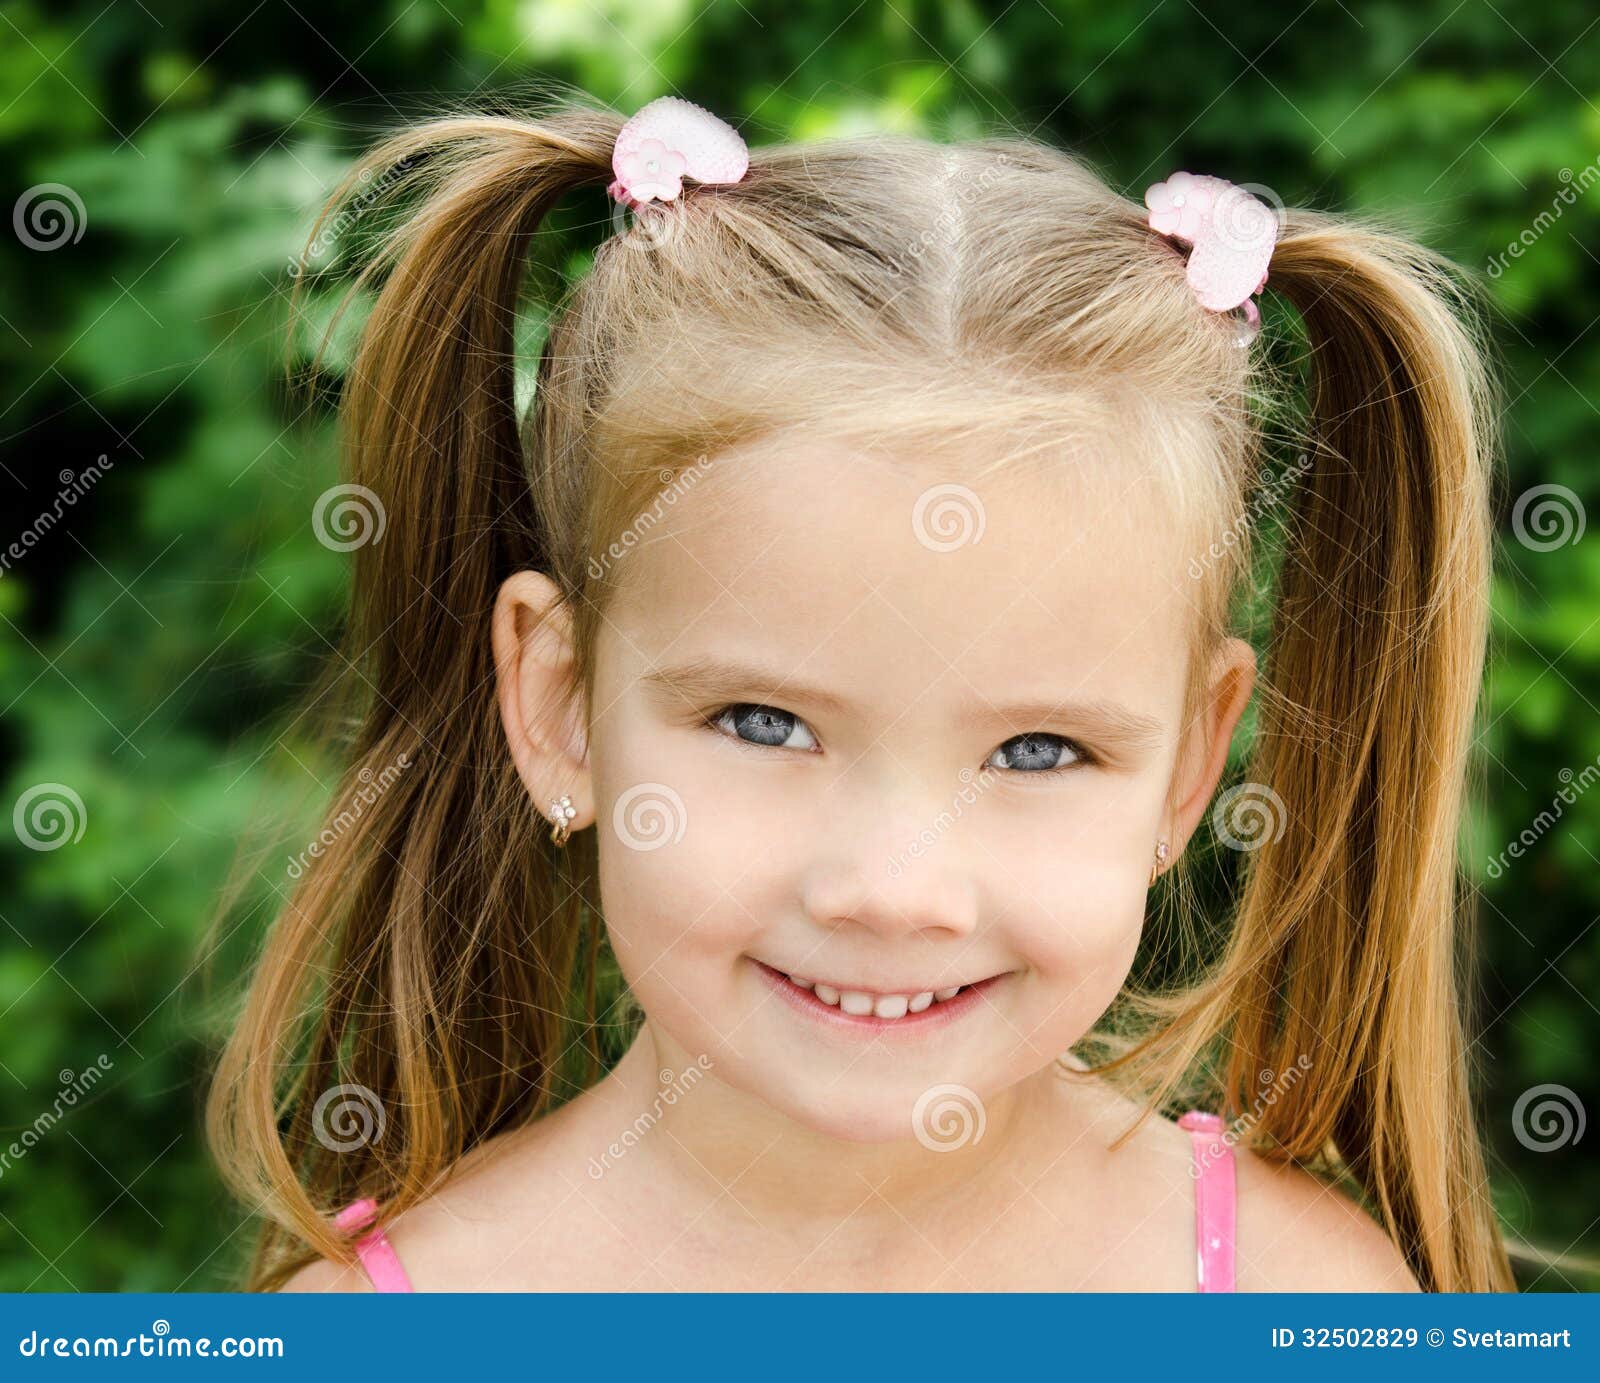 Outdoor Portrait of Smiling Little Girl Stock Image - Image of ...